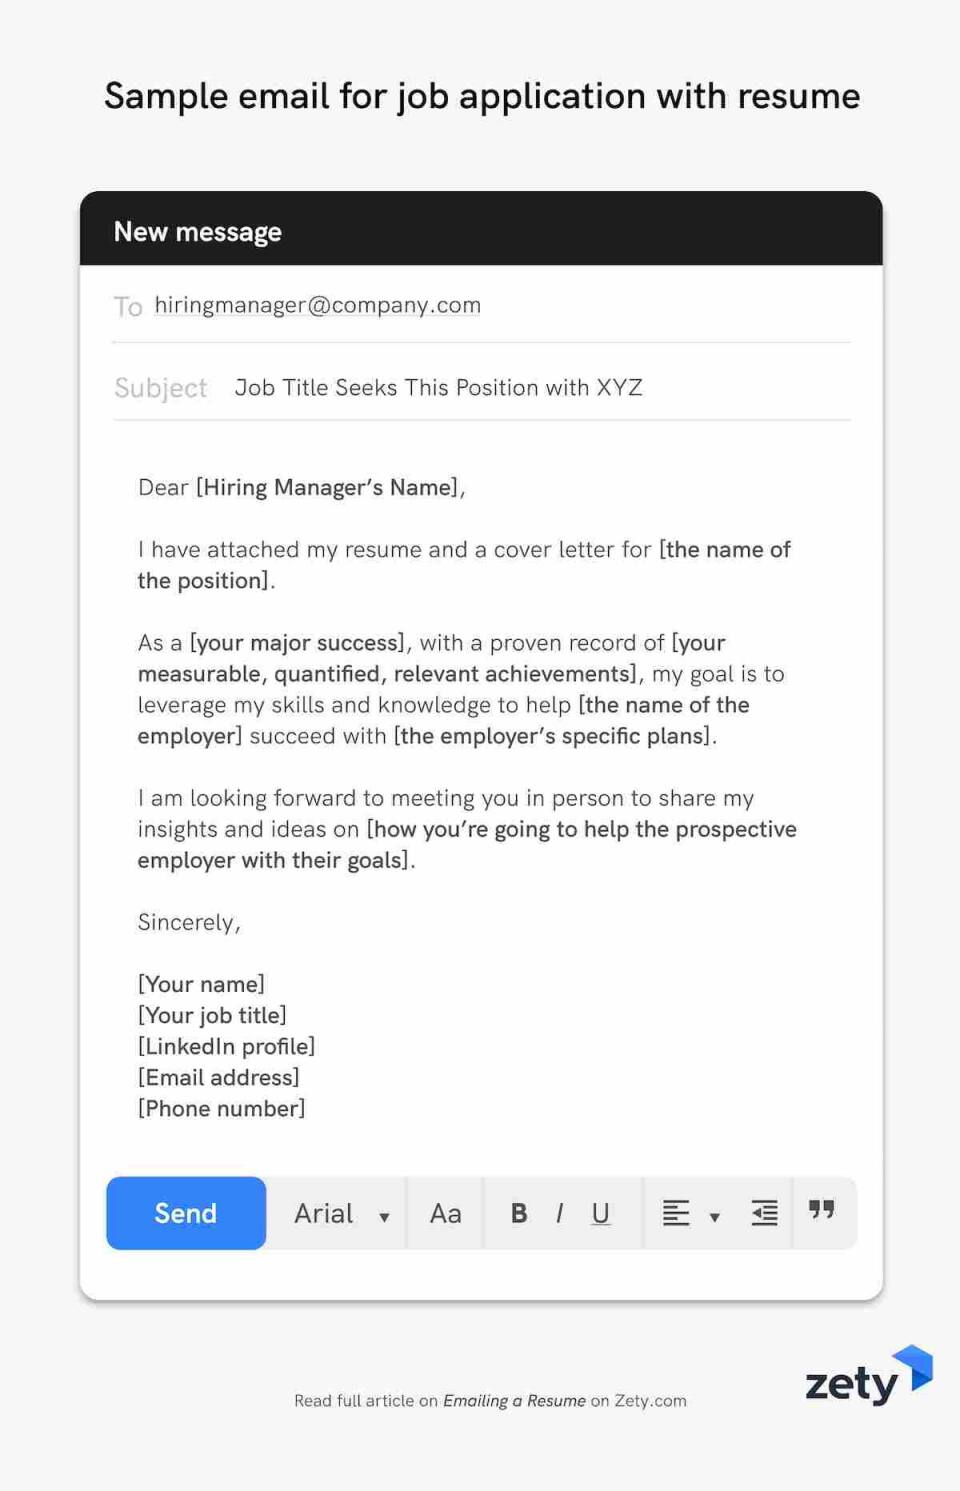 Emailing a Resume: 13+ Job Application Email Samples